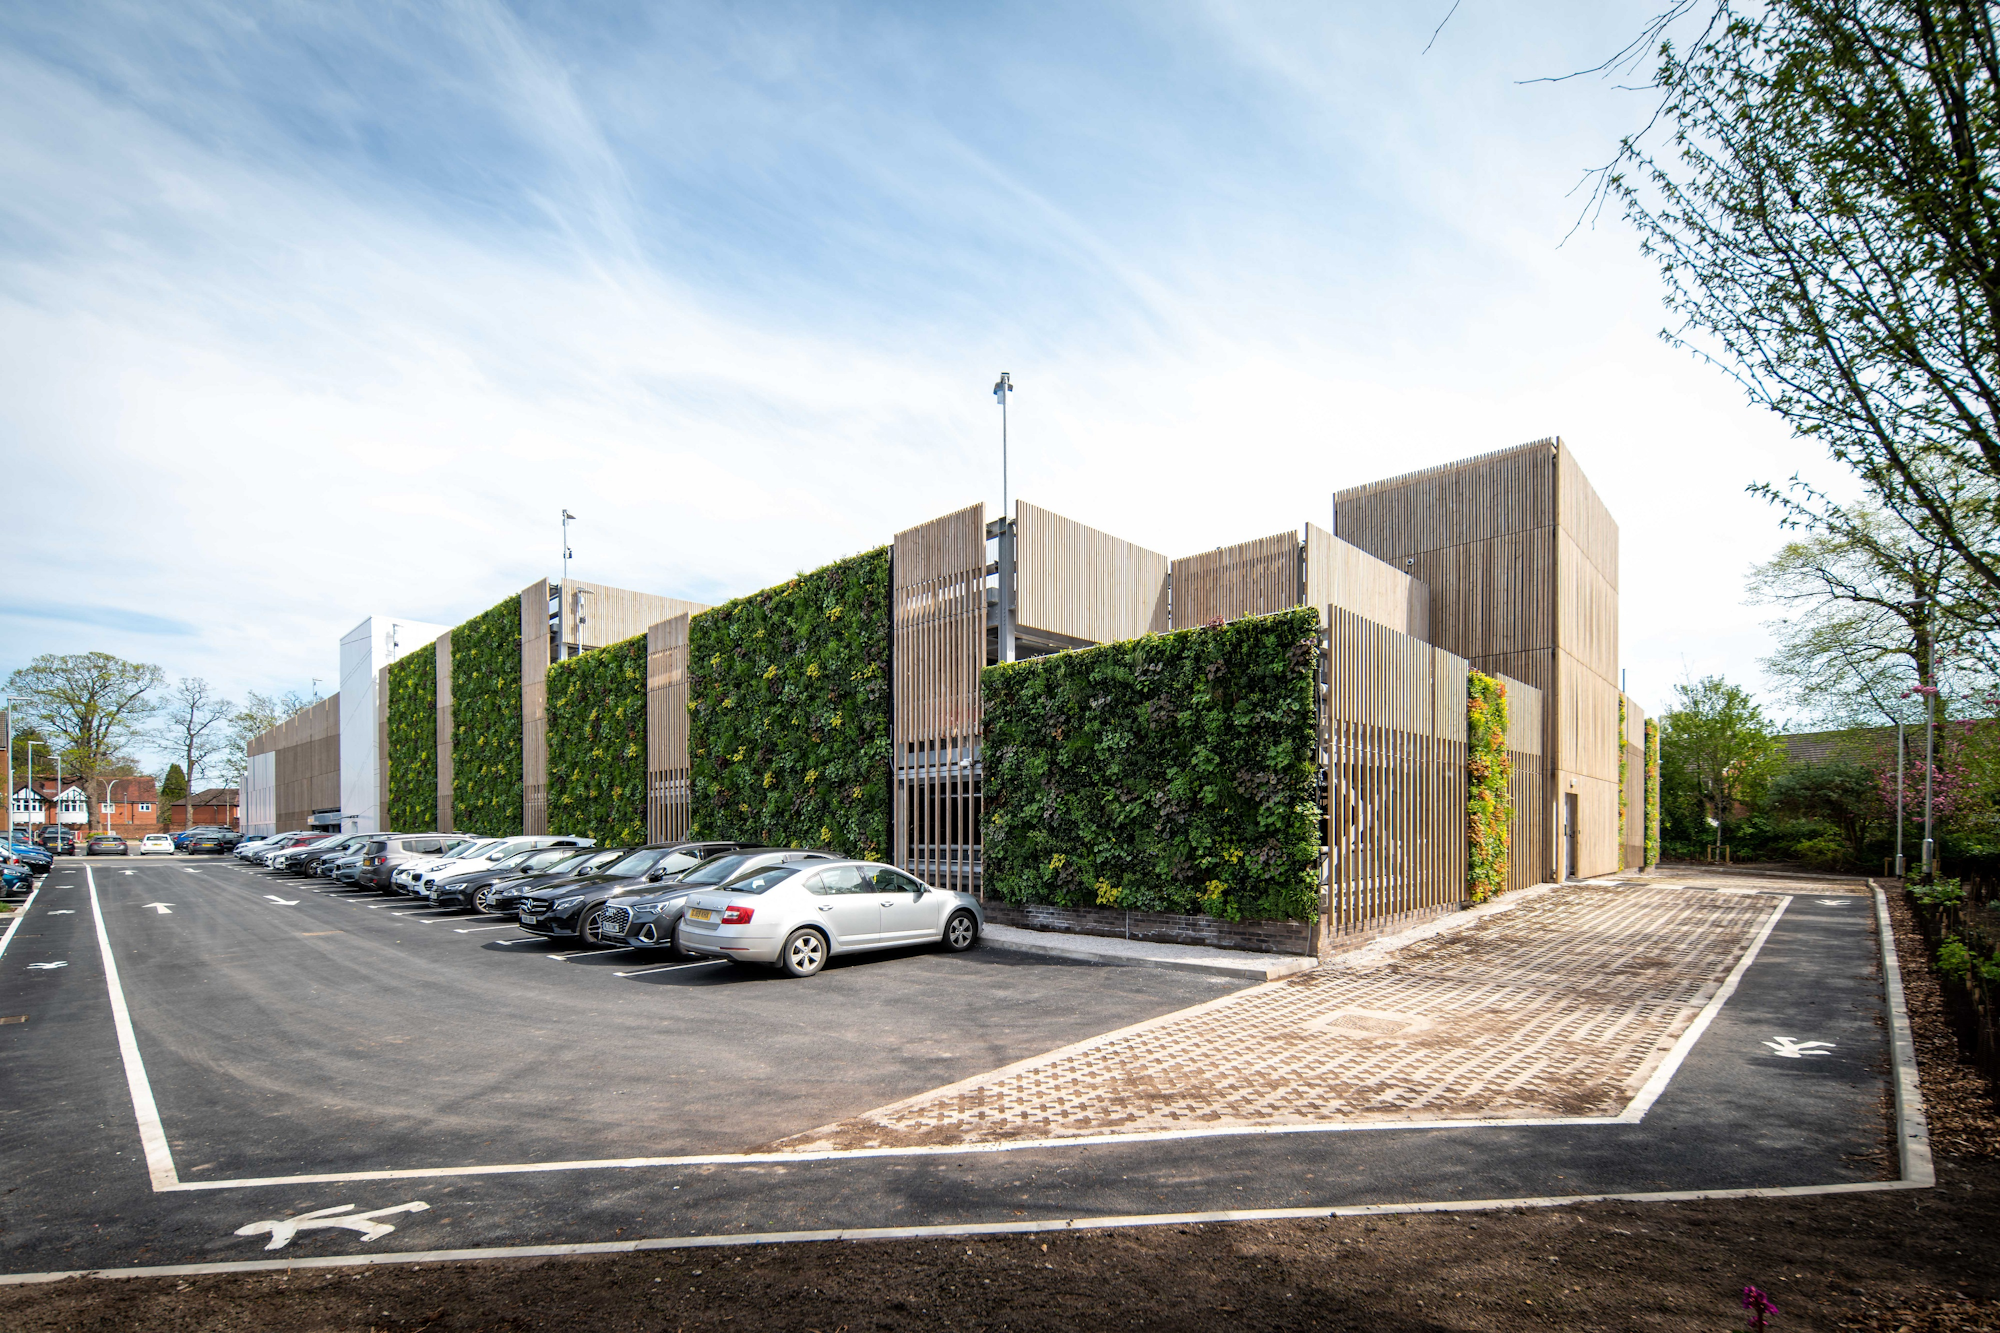 tiered car park with a timber facade and green walls and cars